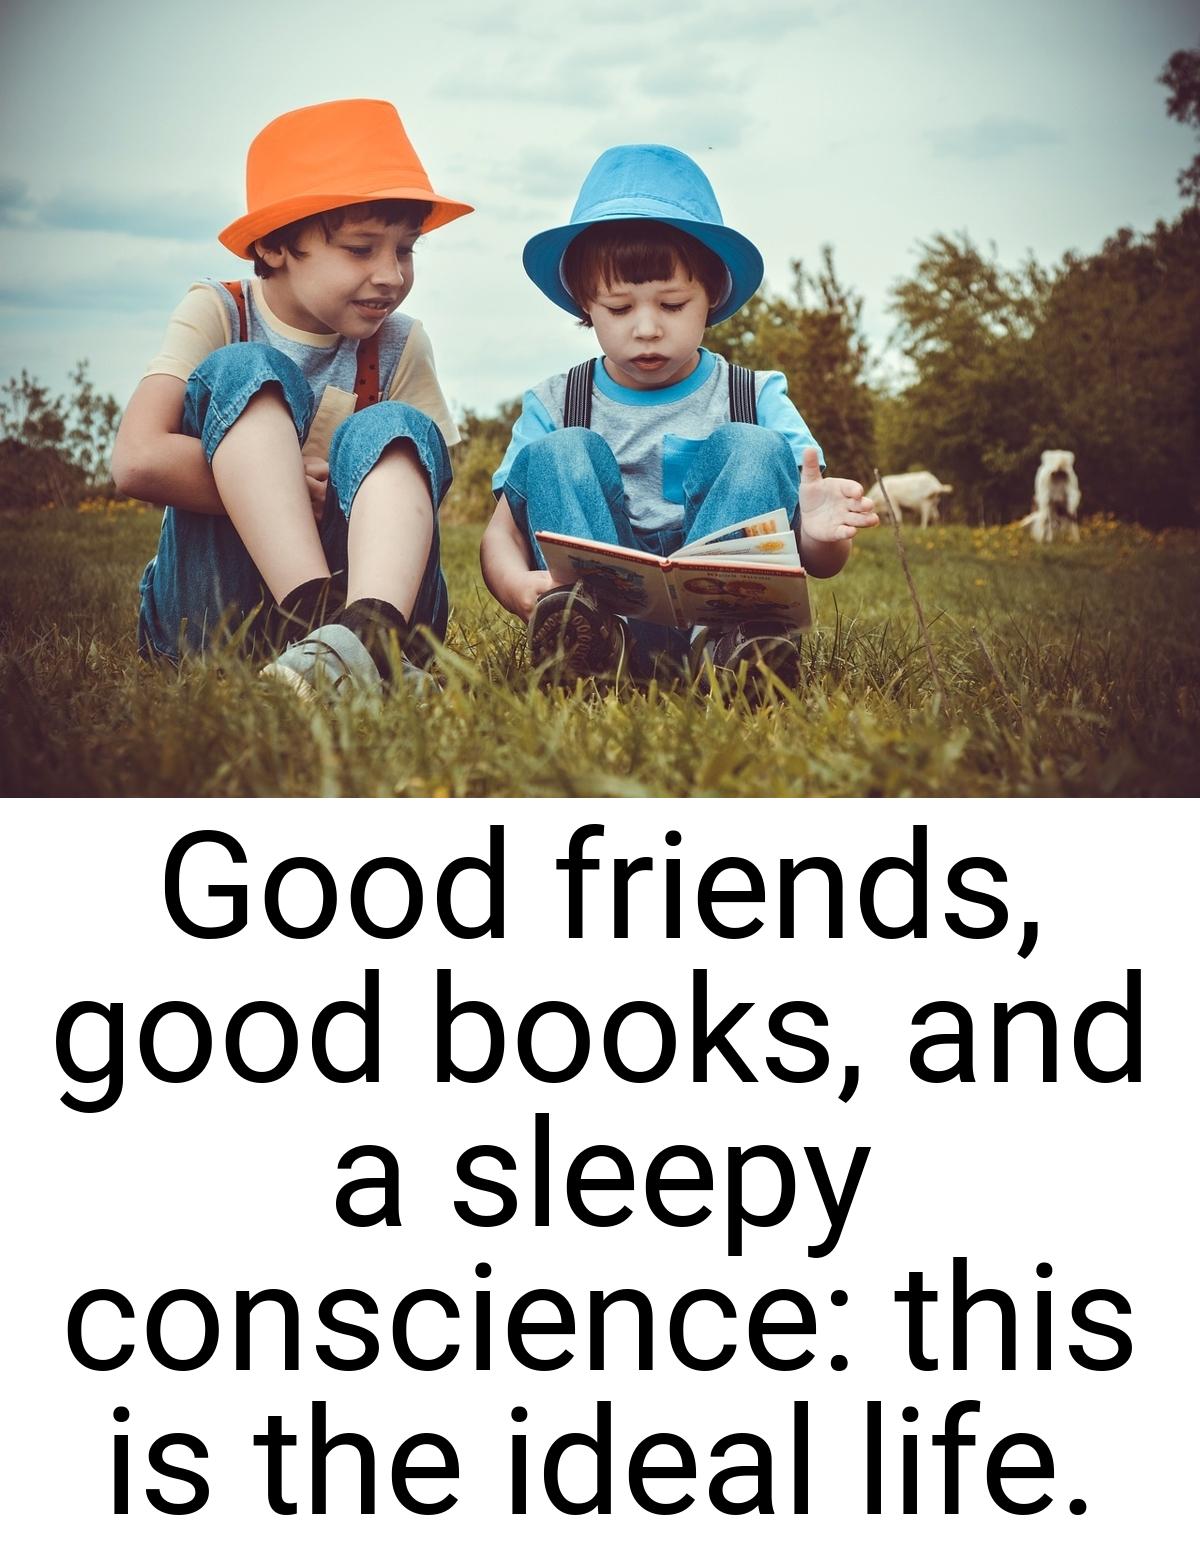 Good friends, good books, and a sleepy conscience: this is